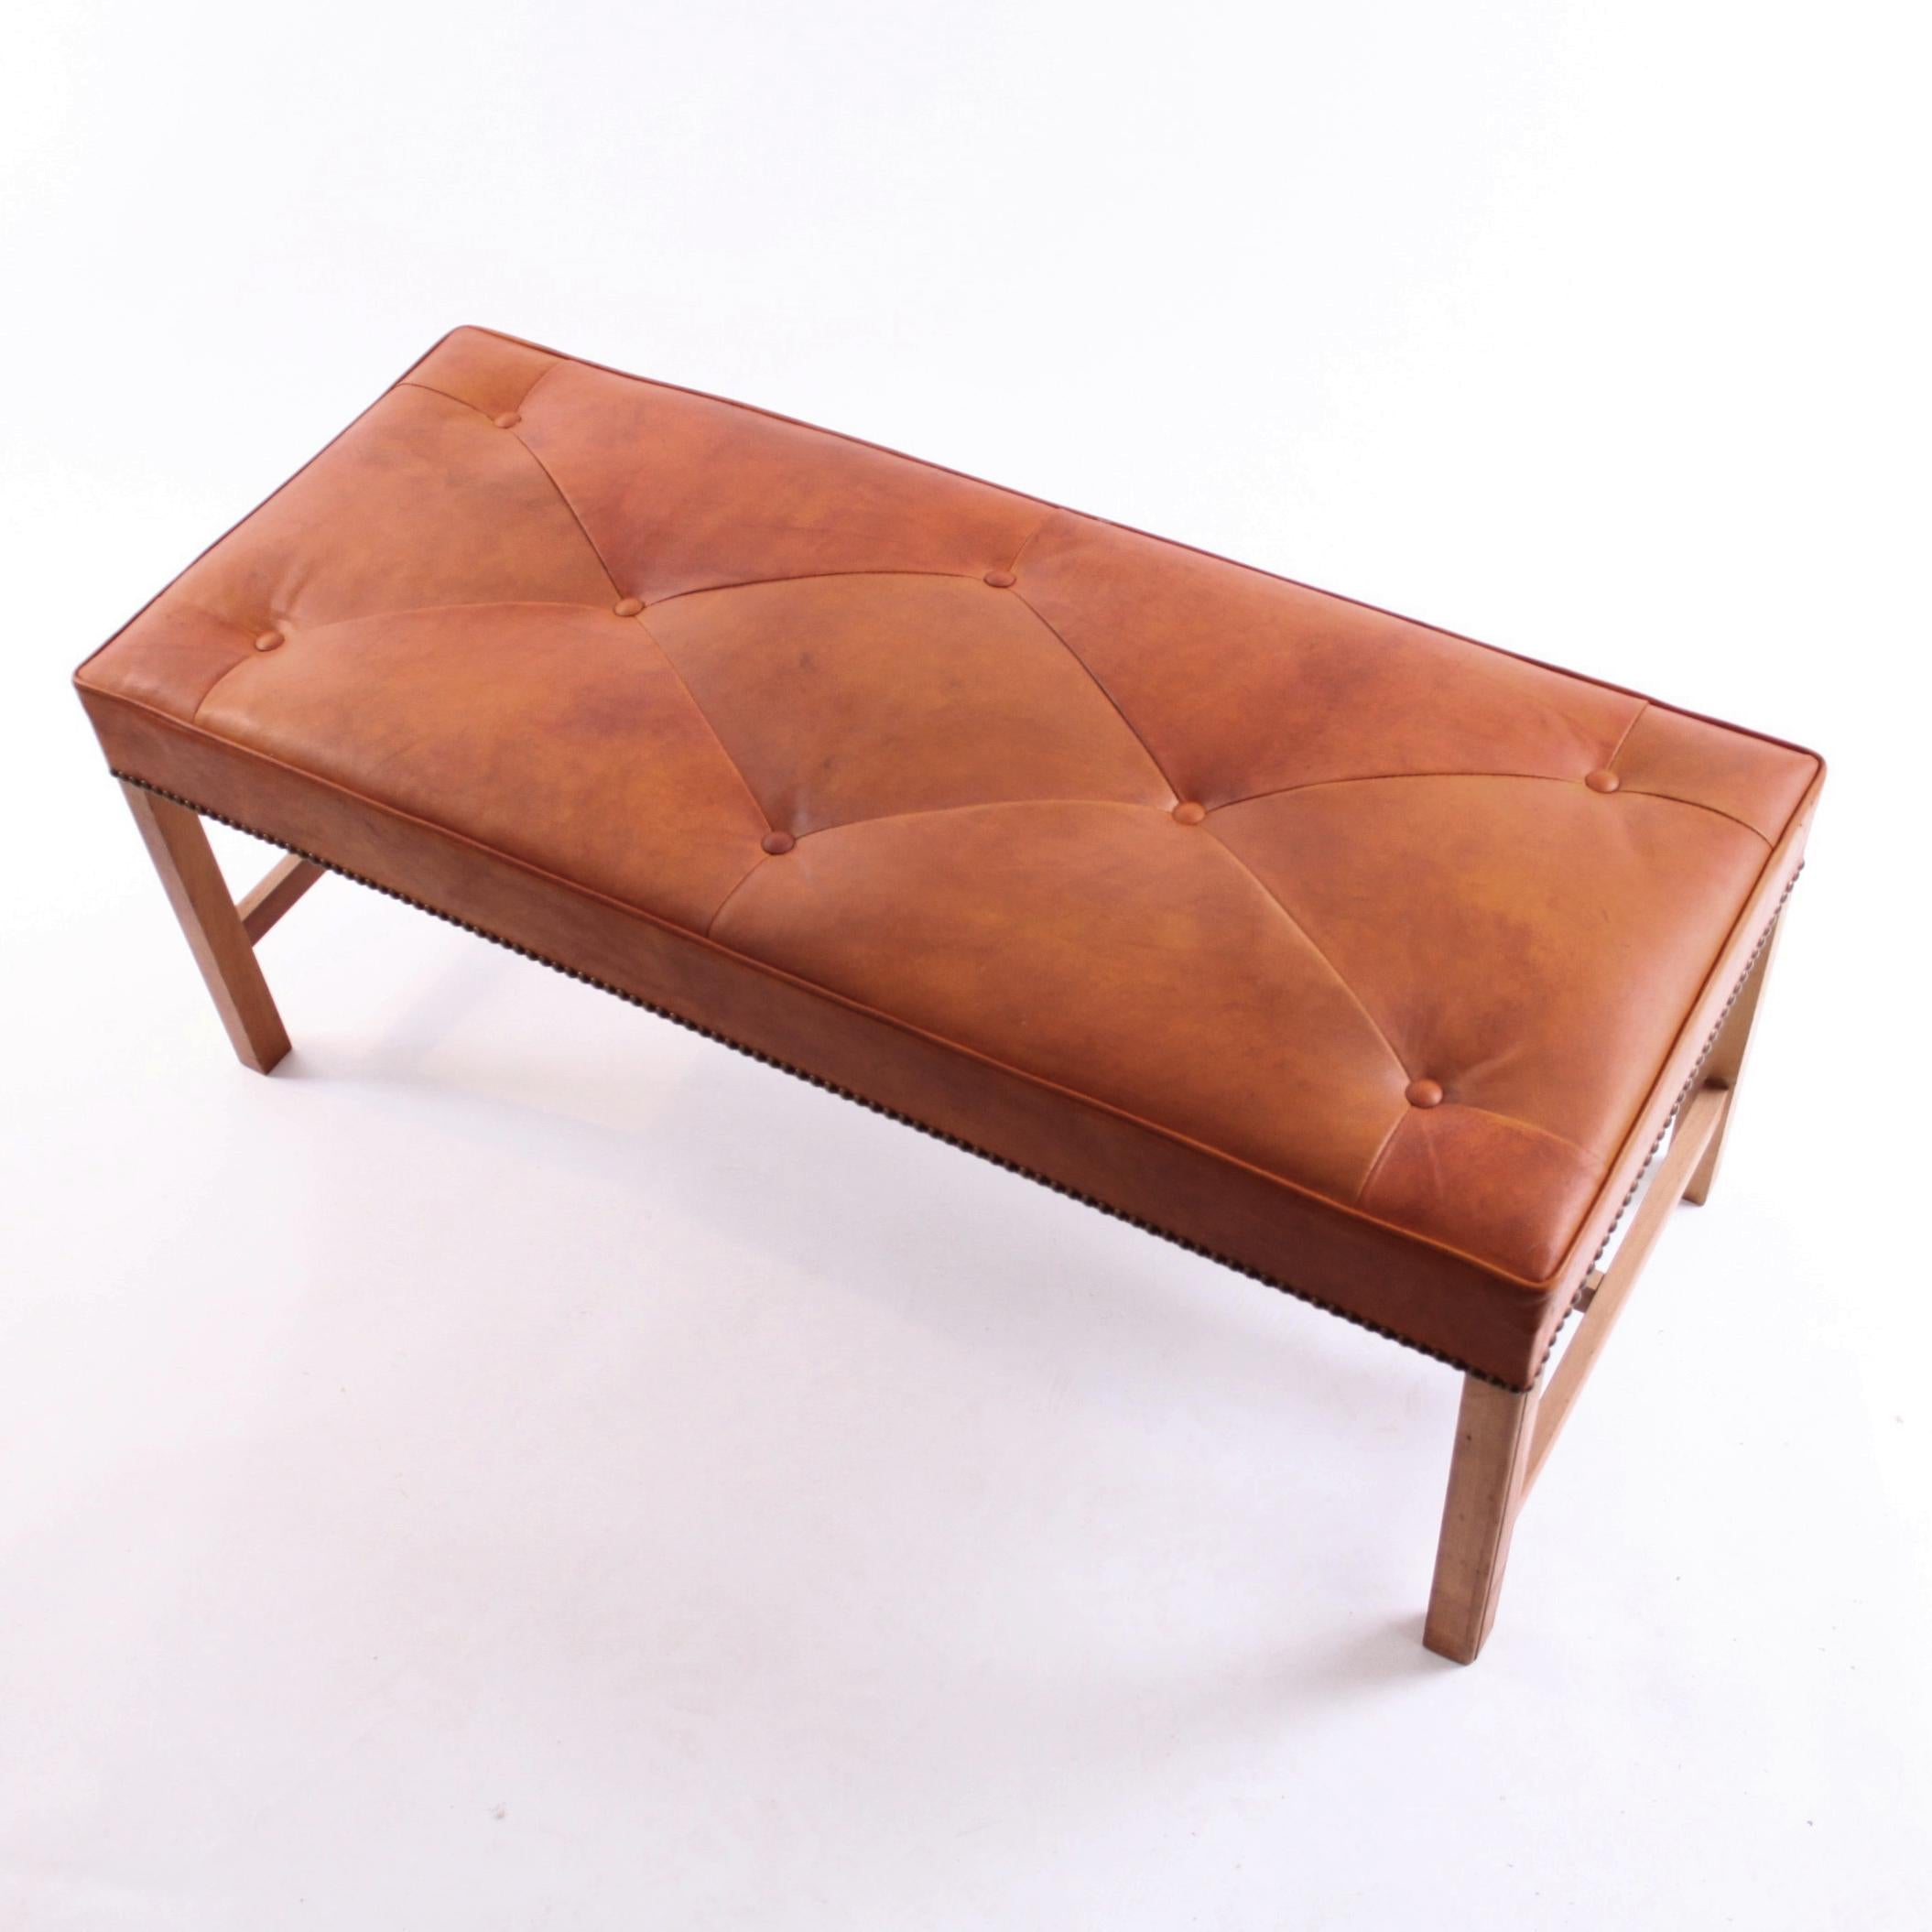 20th Century Pair of Josef Frank Benches, Mahogany and Niger leather, 1950s